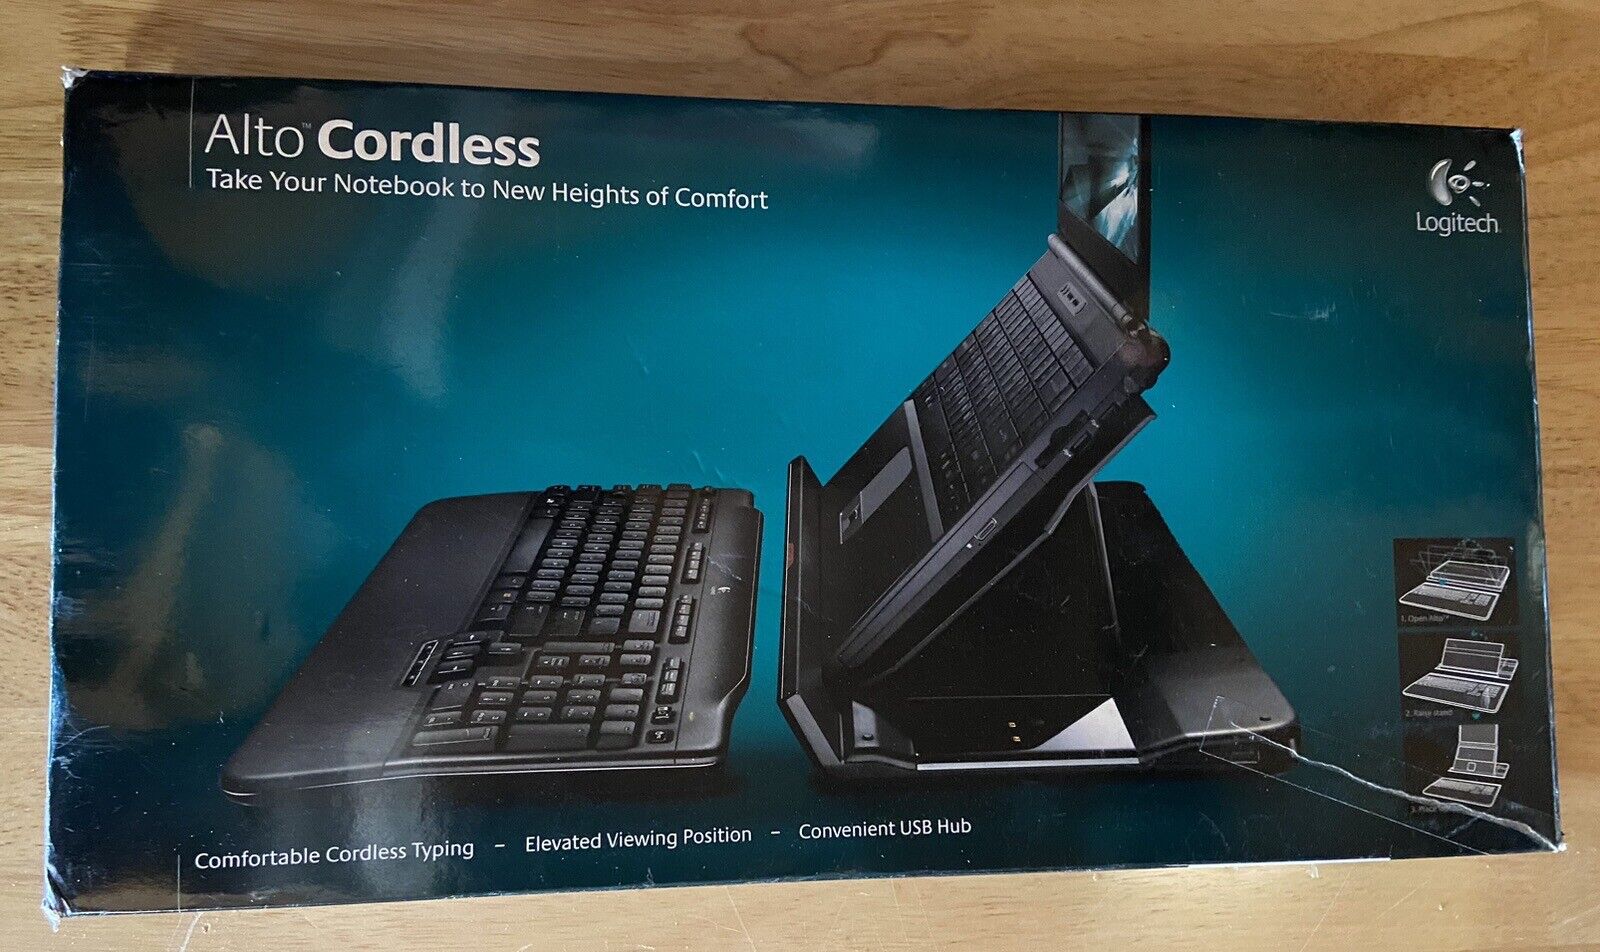 Genuine Logitech Alto Cordless Notebook Stand Wireless Keyboard + Mouse